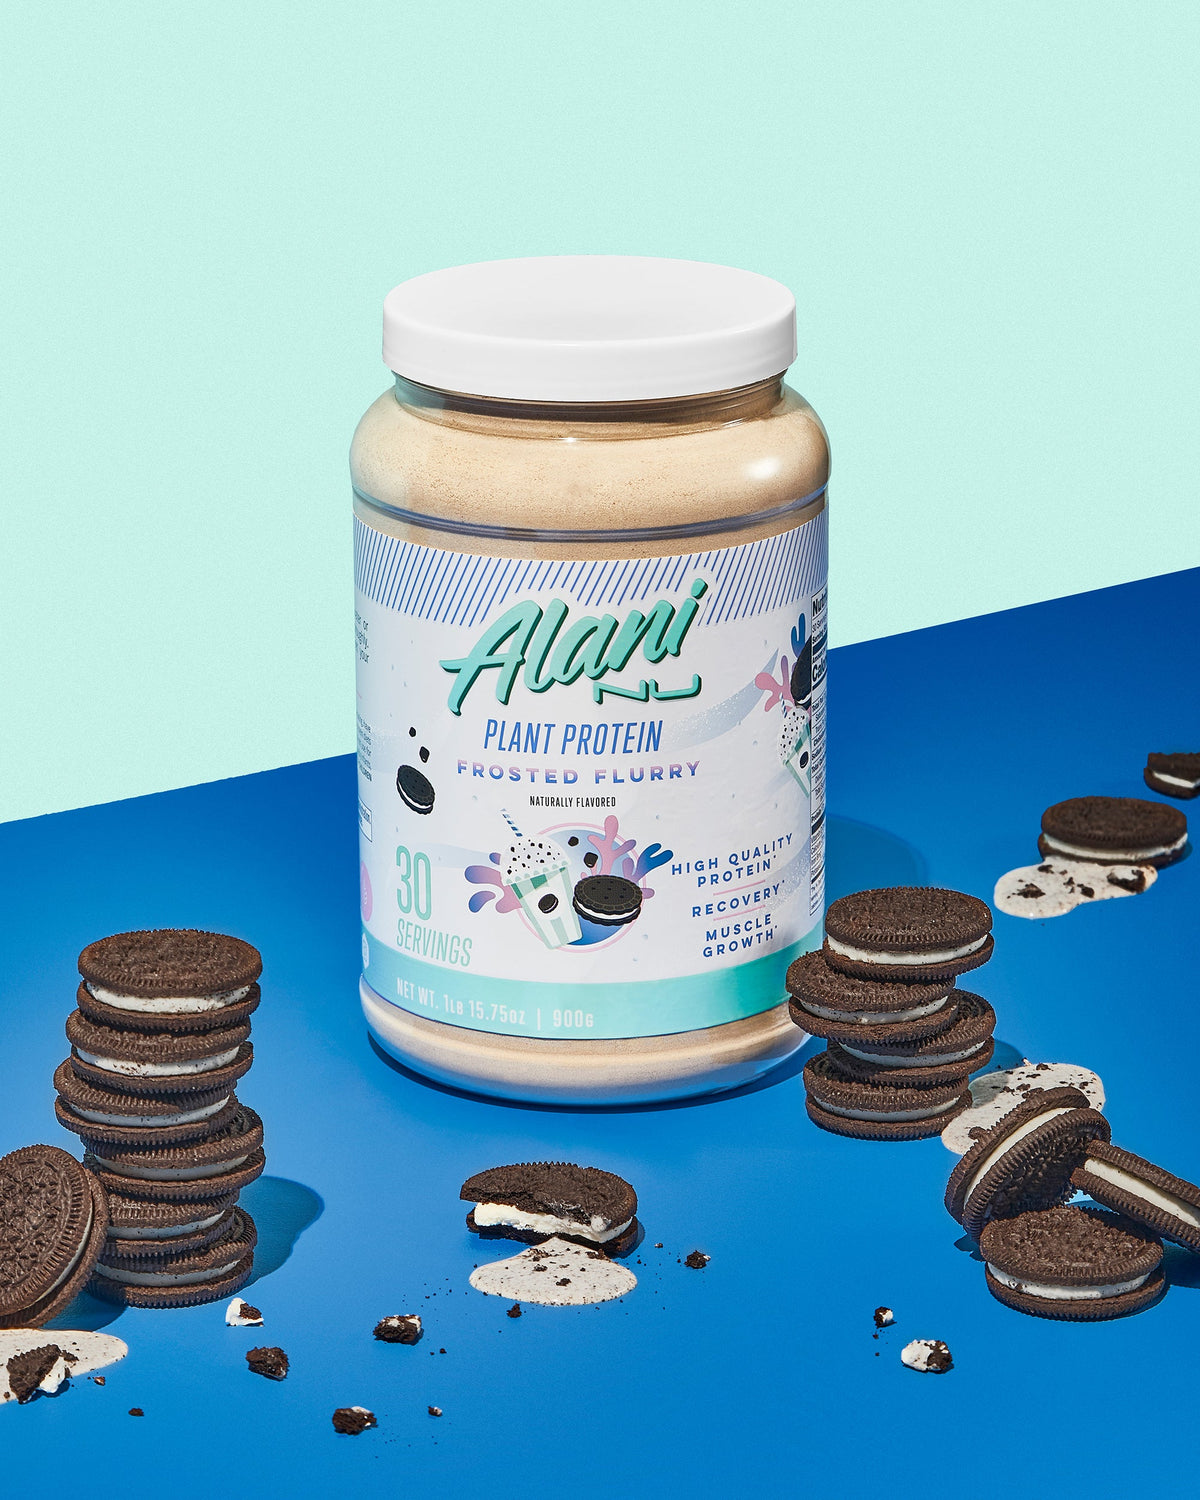 Plant Protein in Frosted Flurry flavor surrounded by cookies.